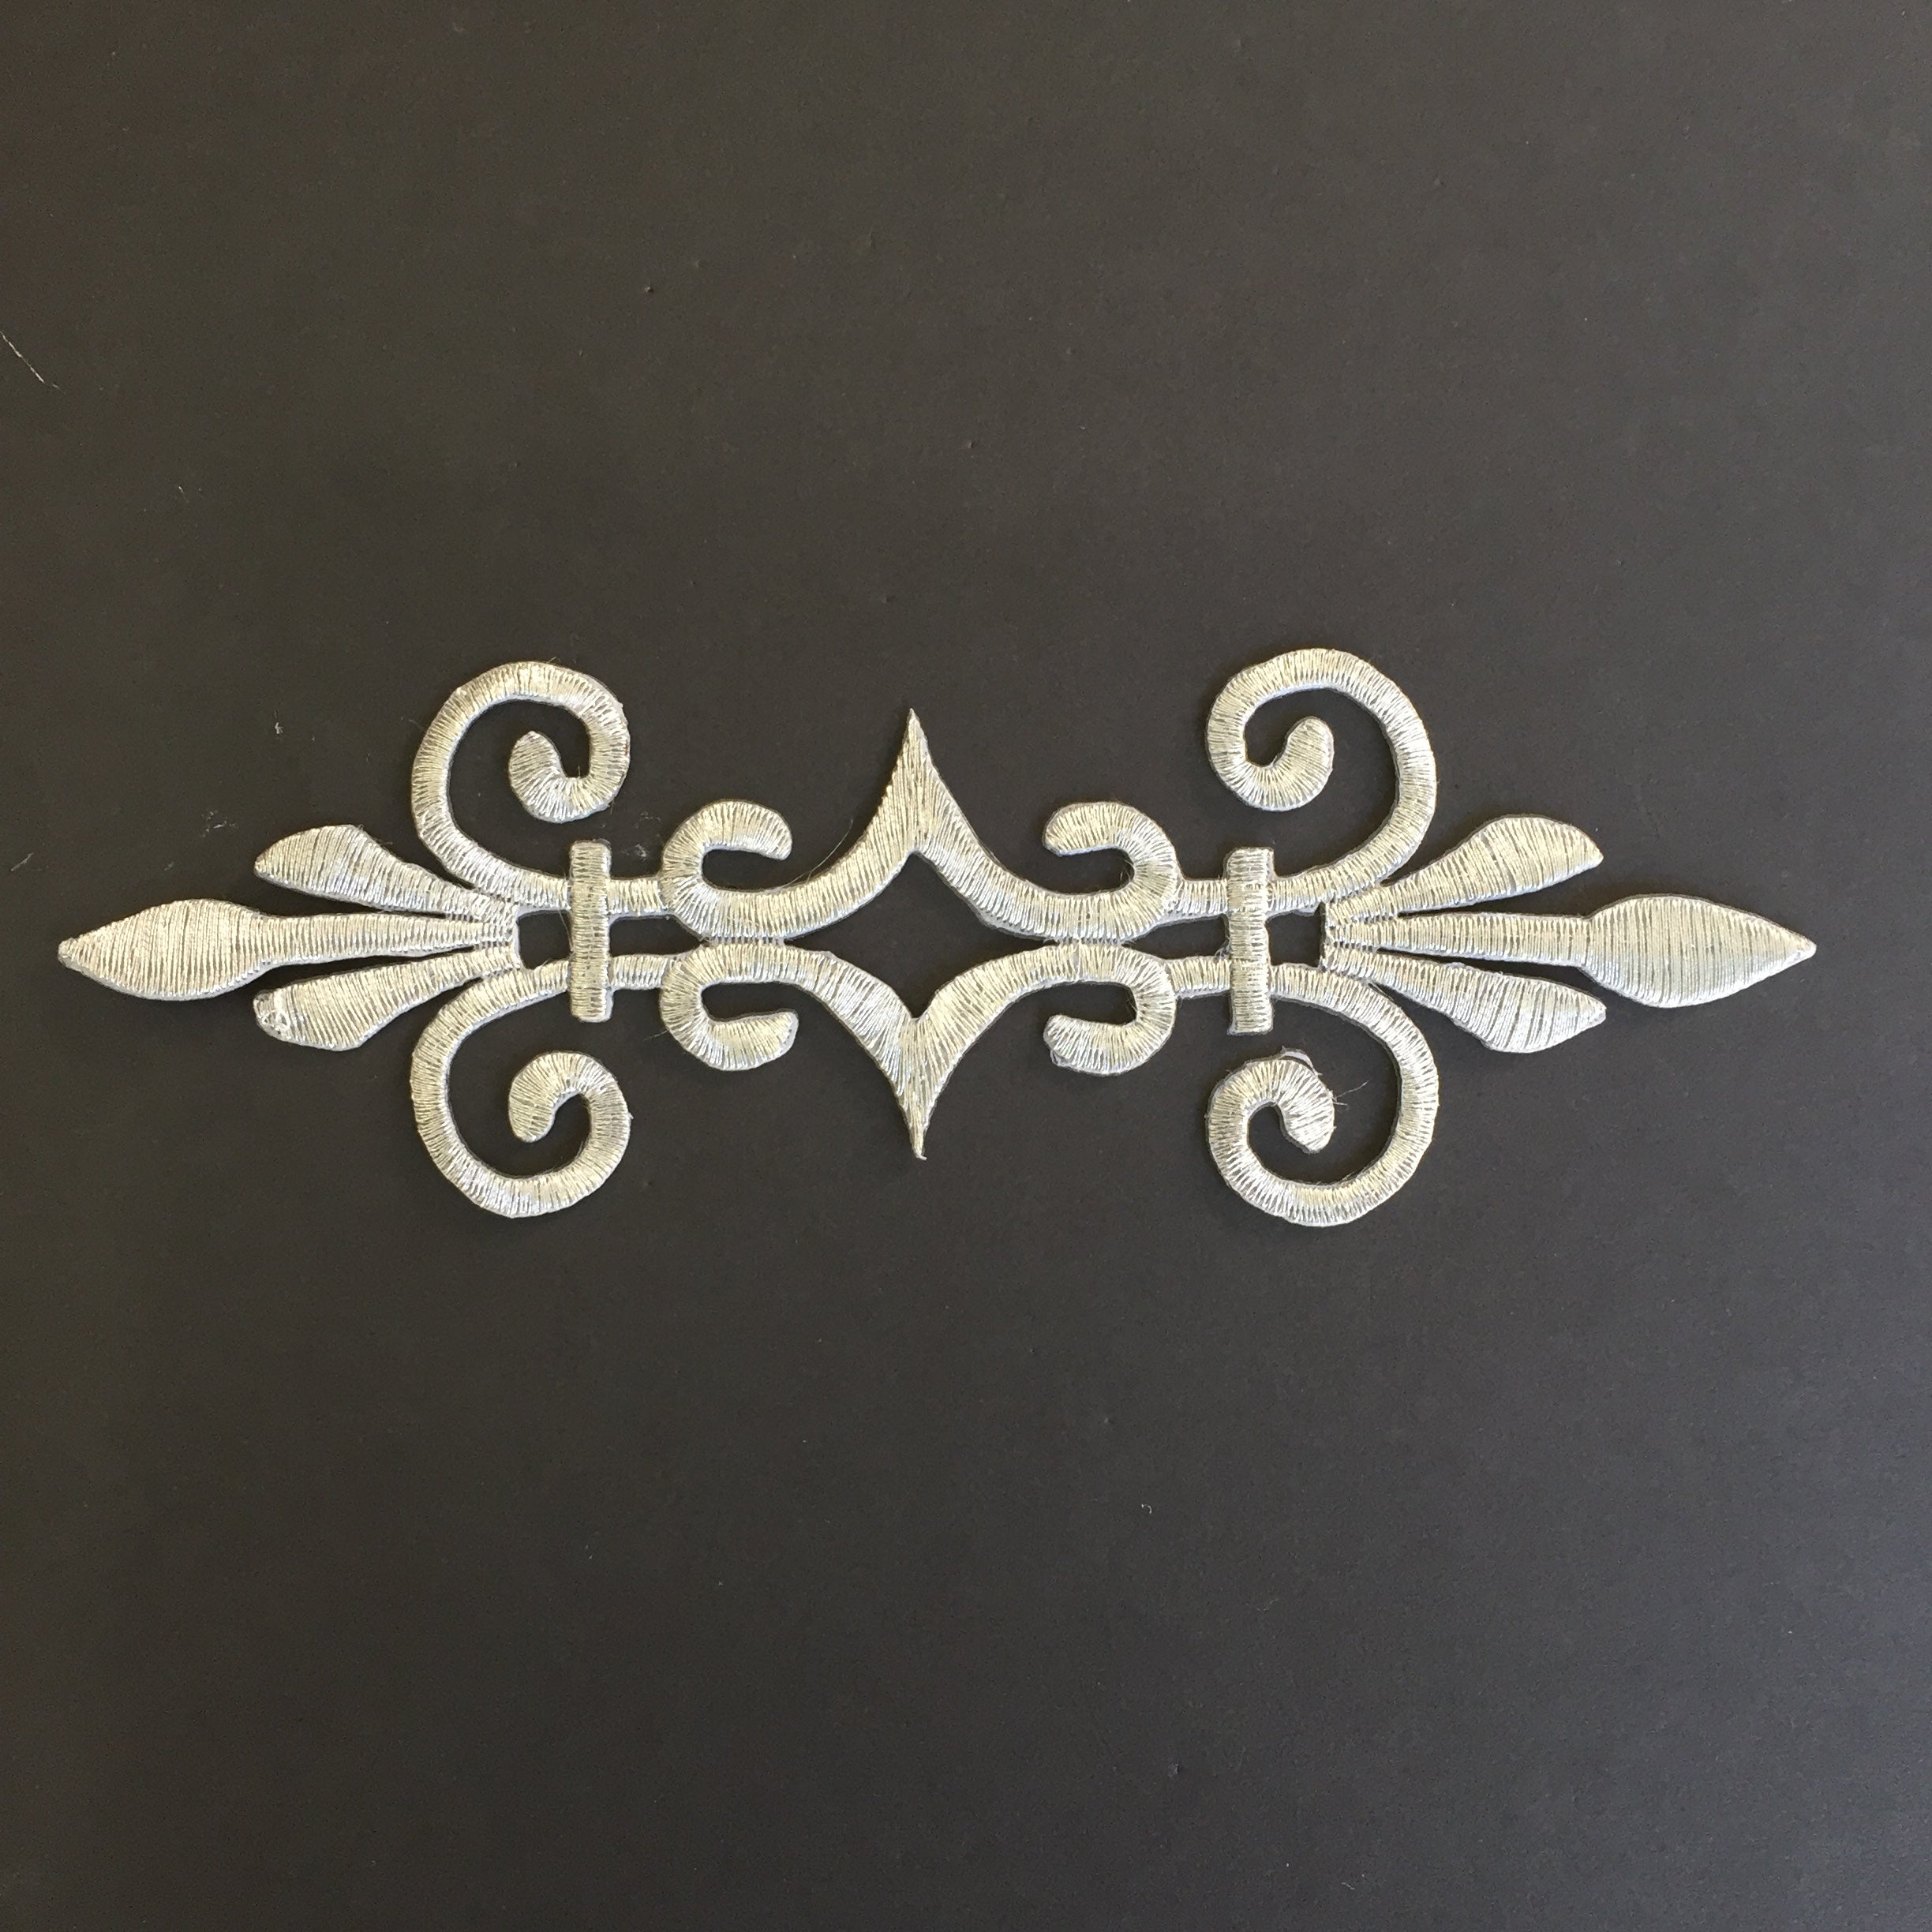 Single baroque style applique embroidered with metallic silver thread displayed on a black background.